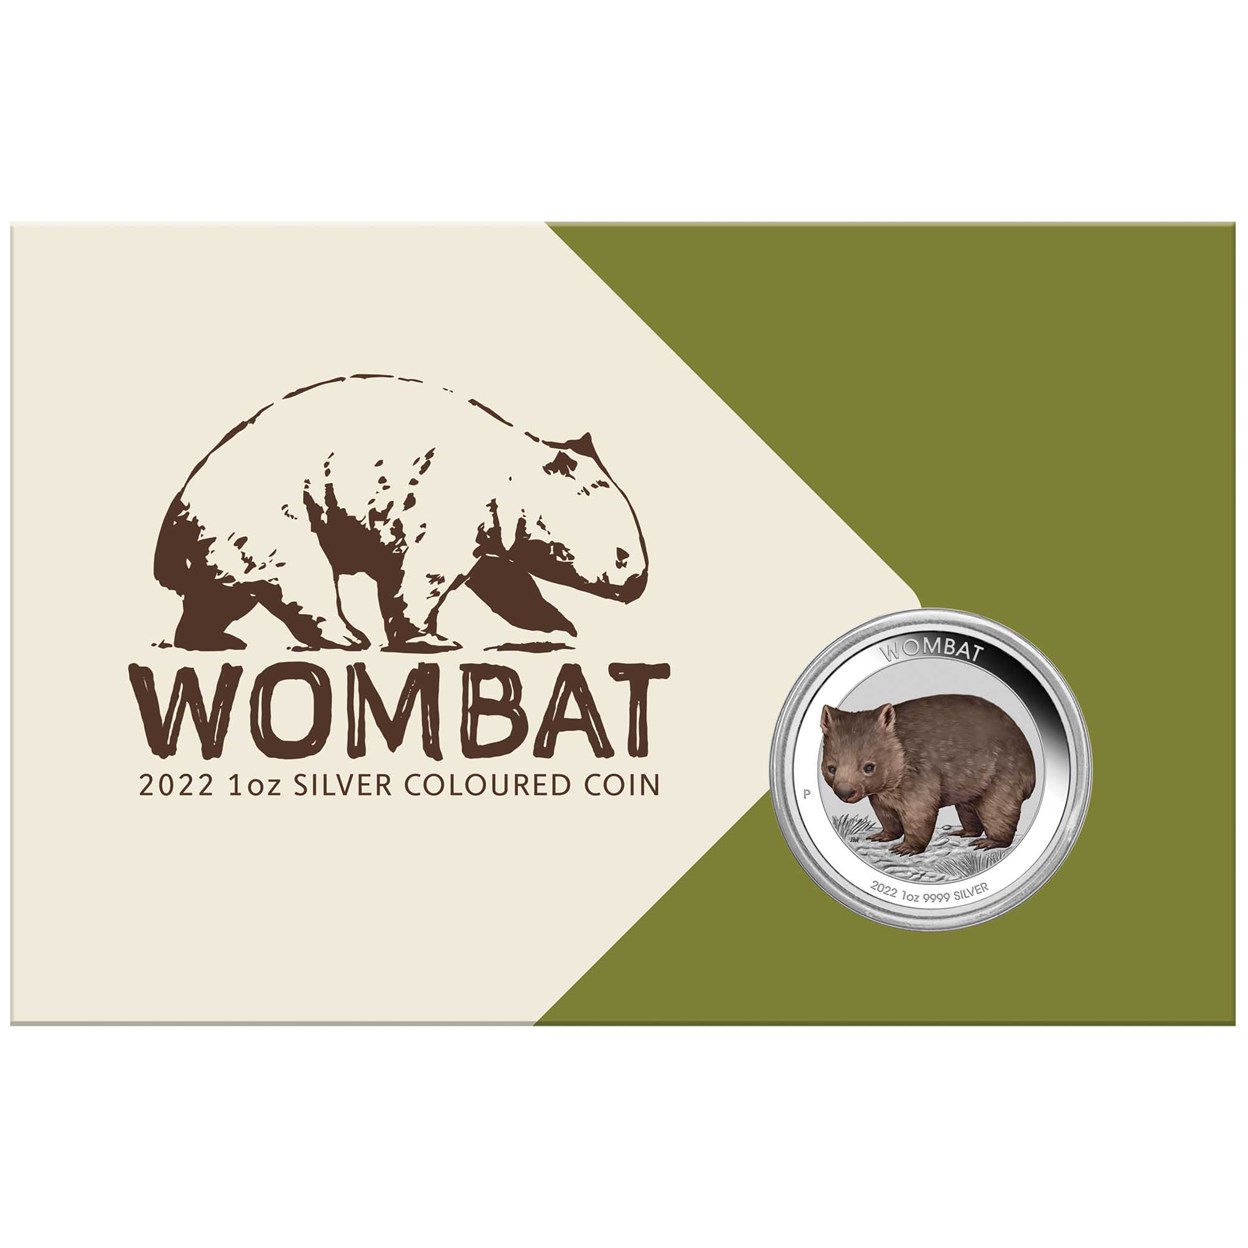 00 Wombat 2022 1oz Silver Coloured Coin InCard HighRes